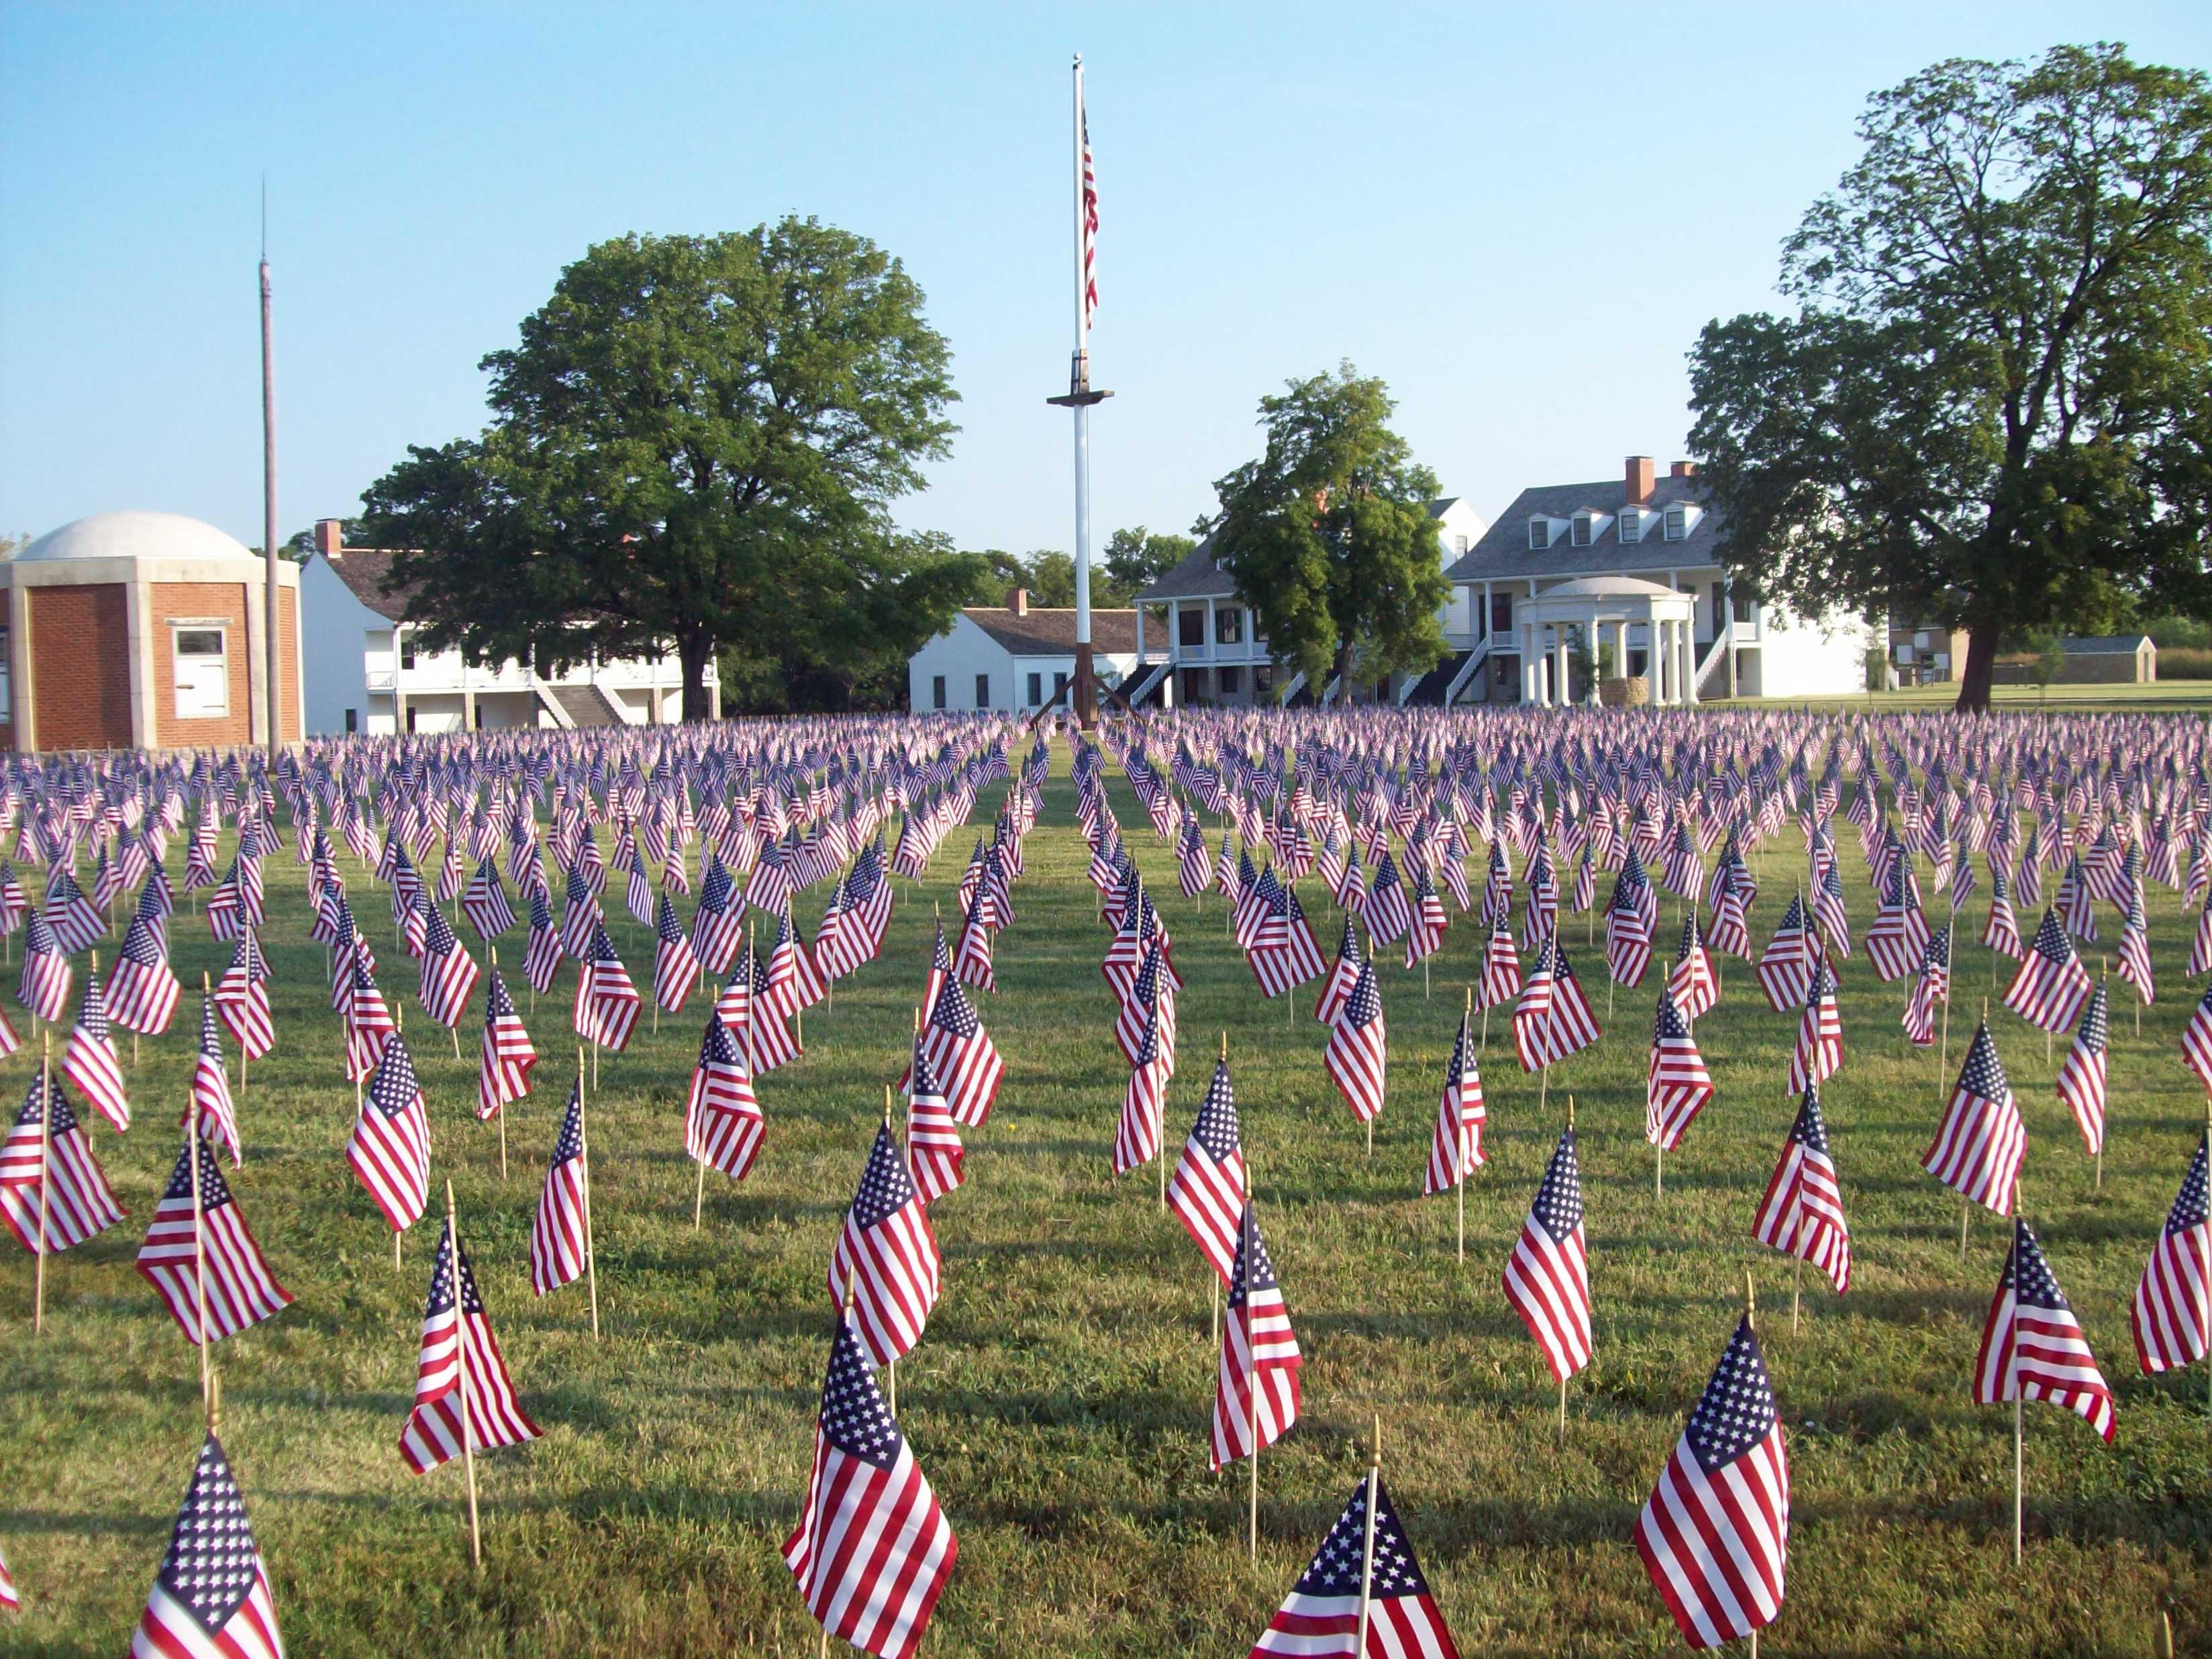 Picture of rows of flags across the parade ground with trees in the background.